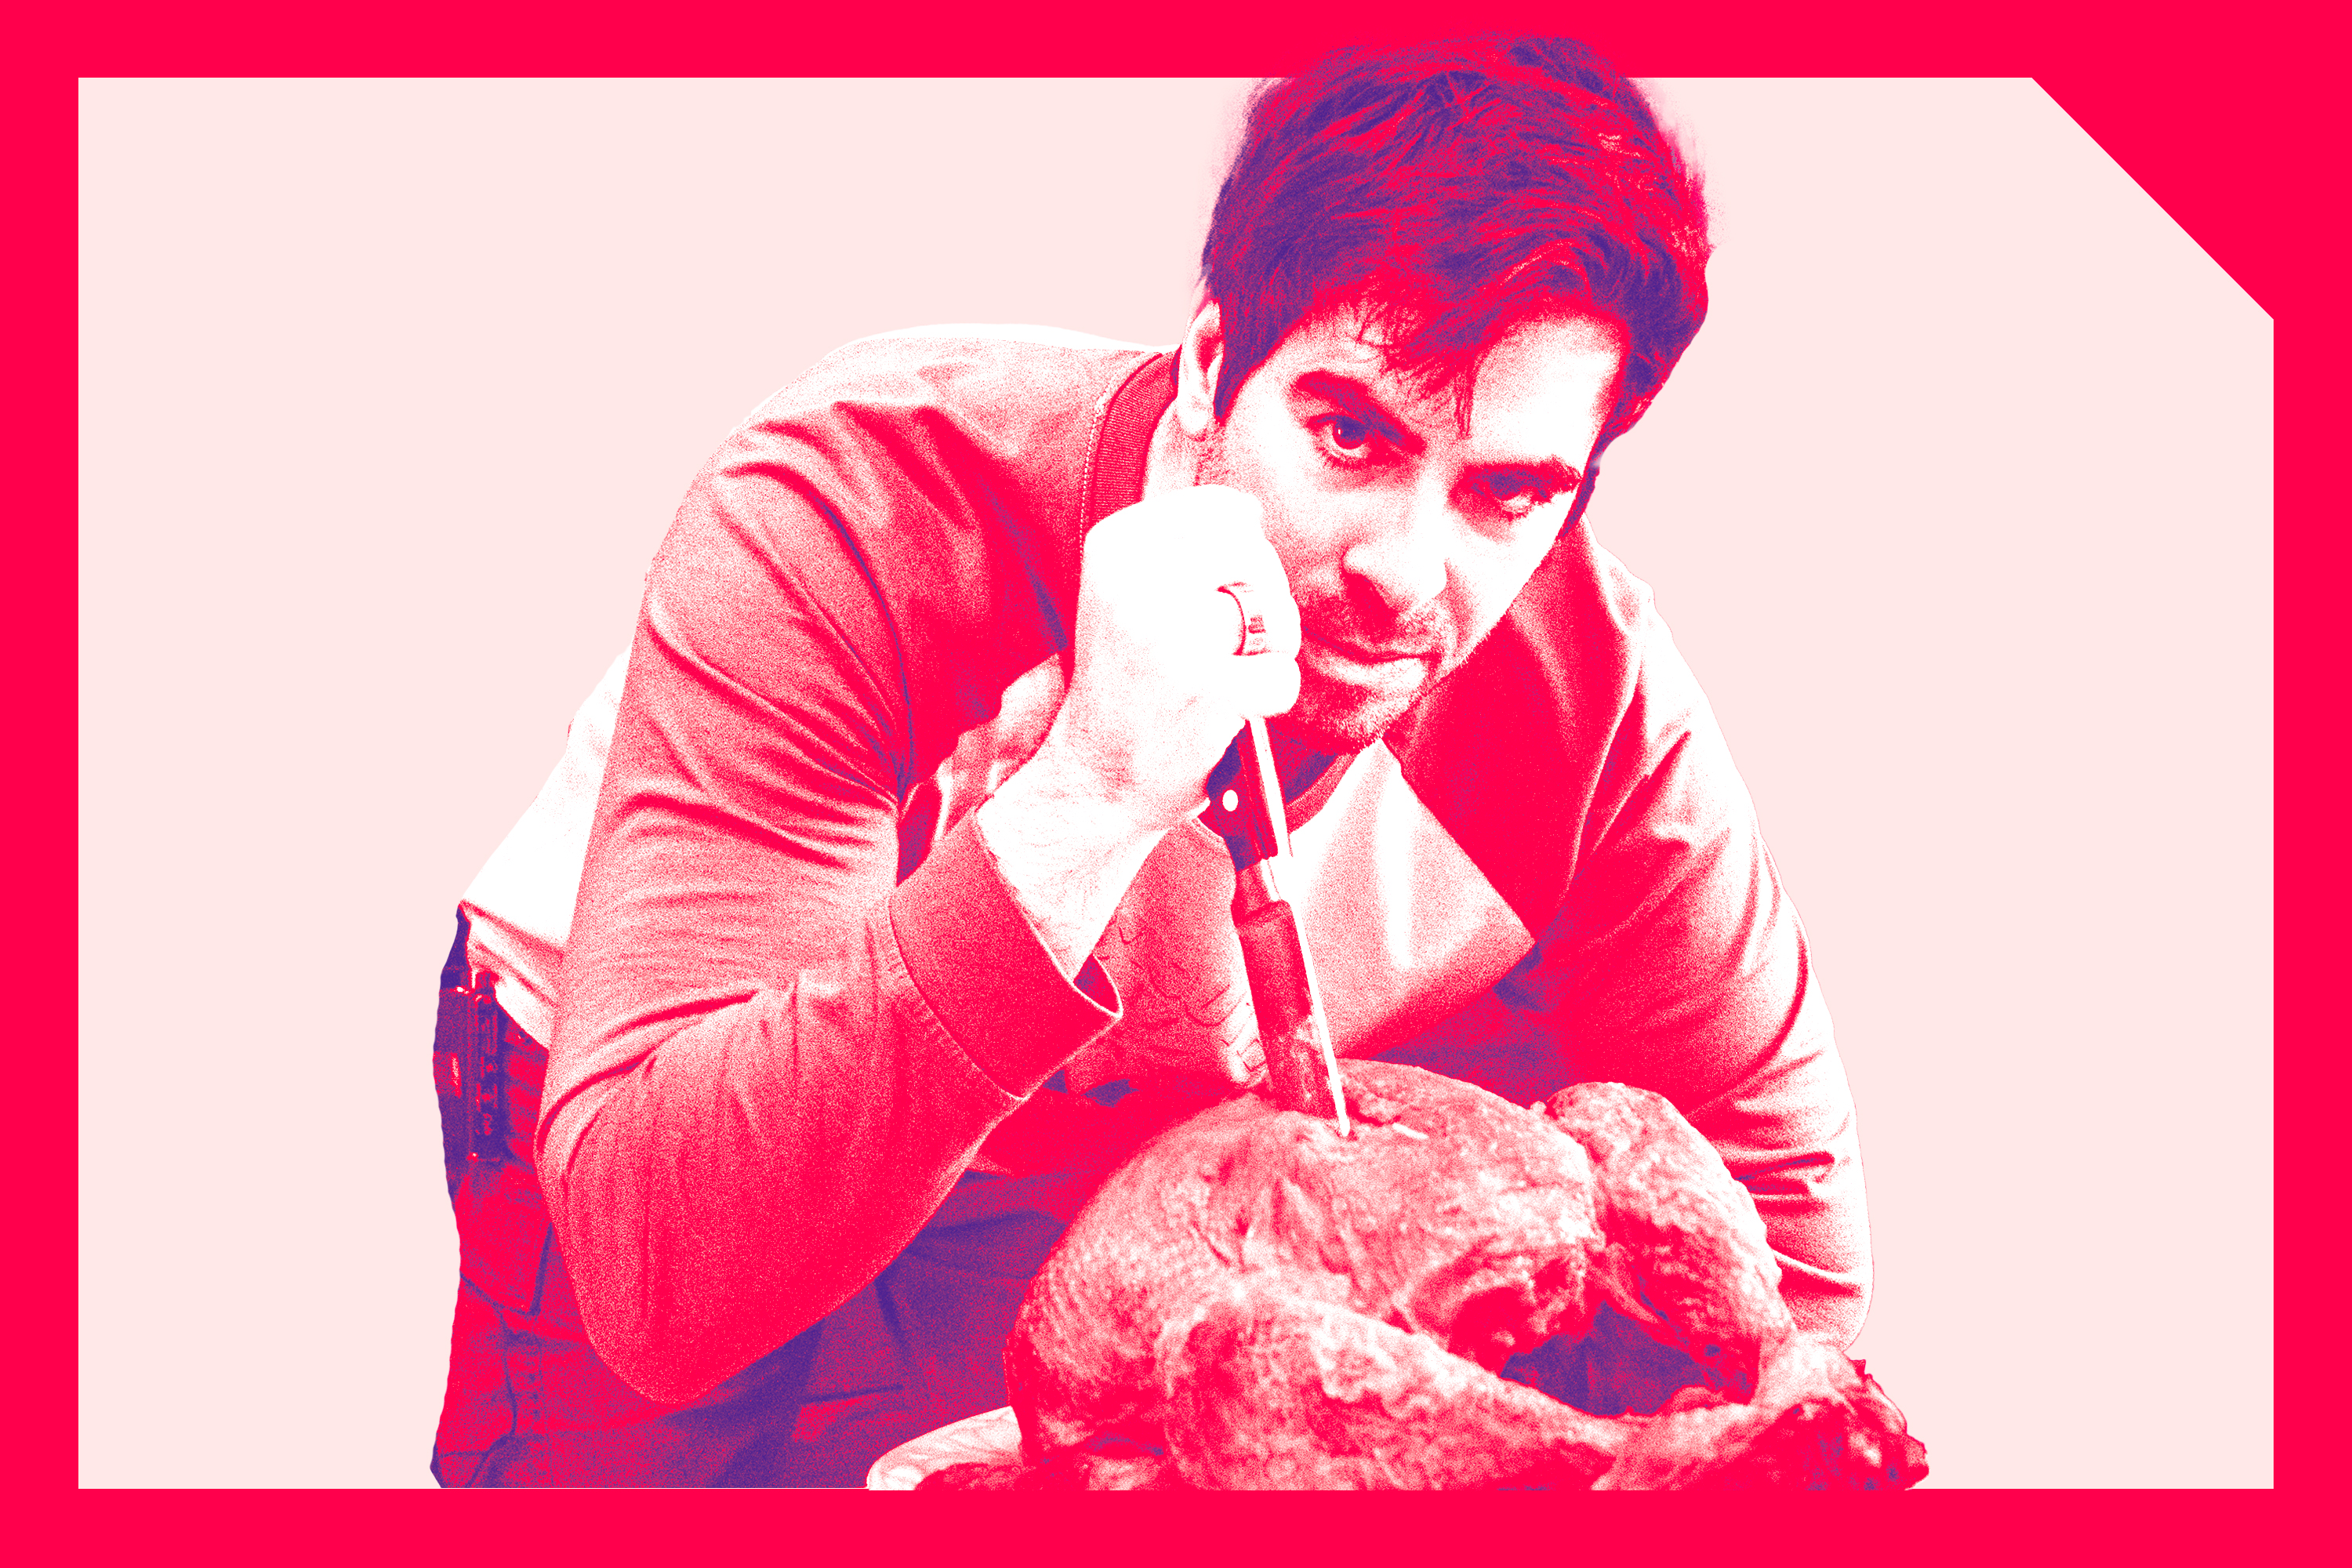 Eli Roth stabbing a roasted turkey shaded with white and red